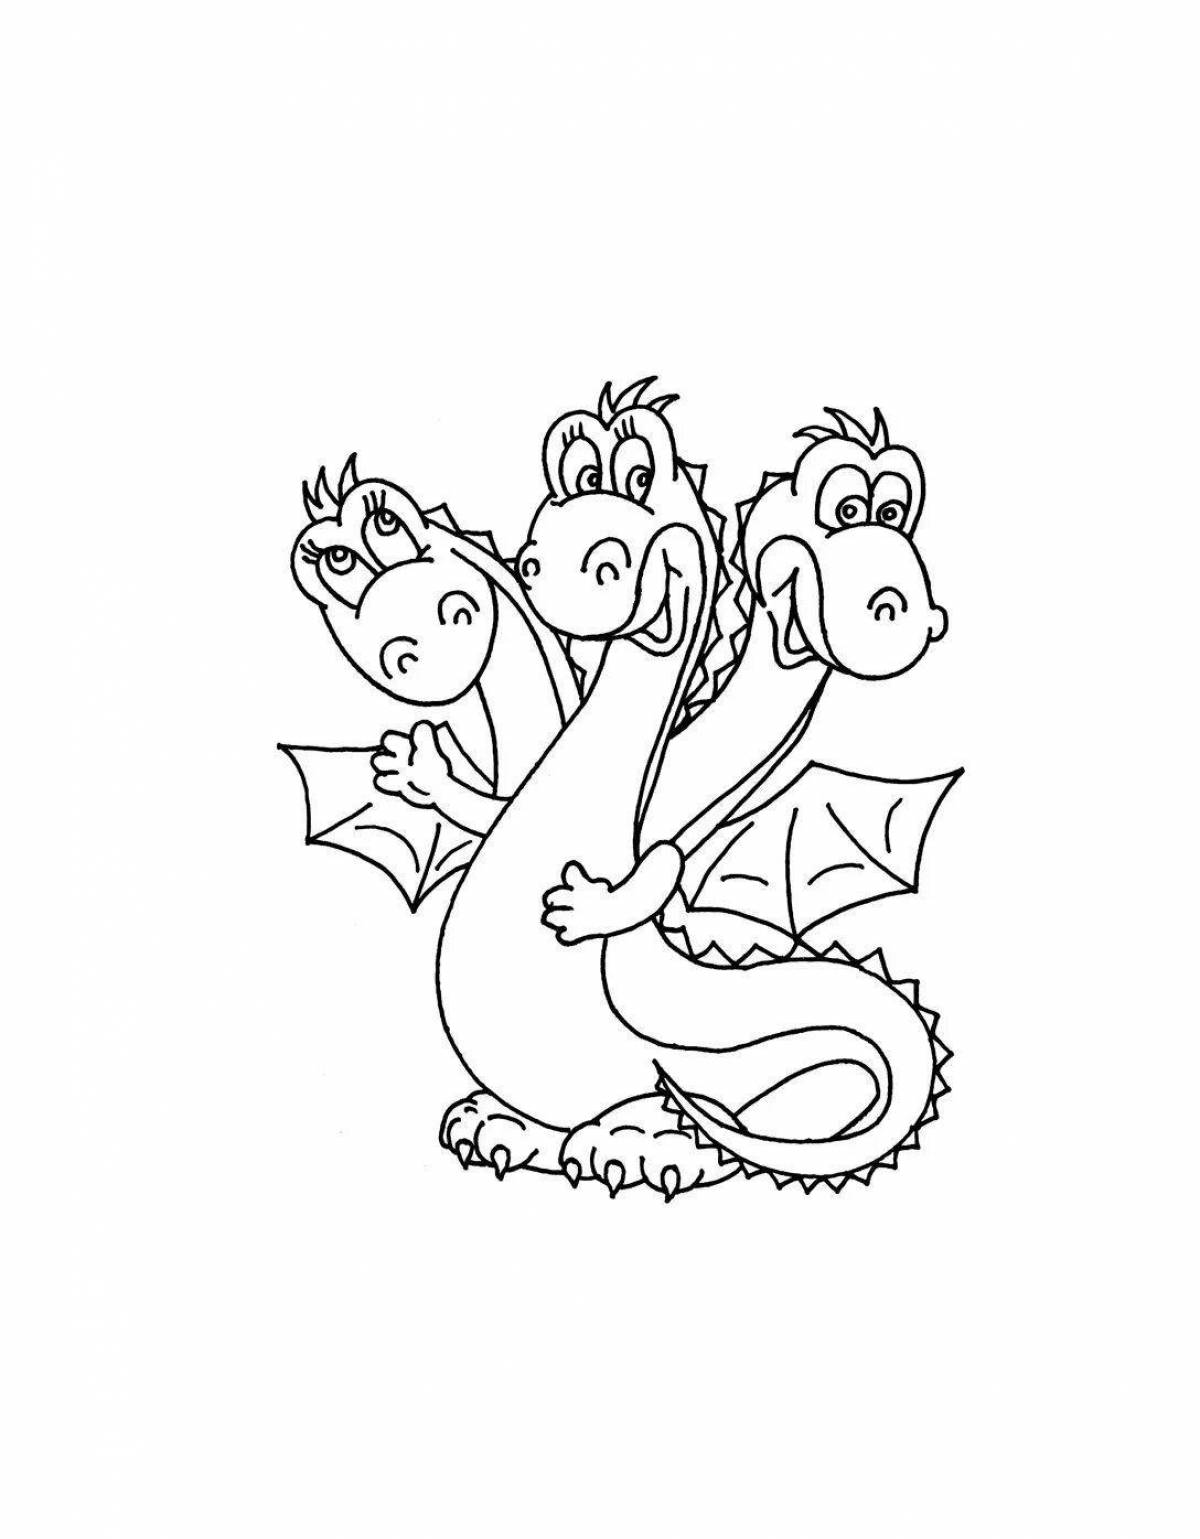 Coloring page magnanimous three-headed dragon